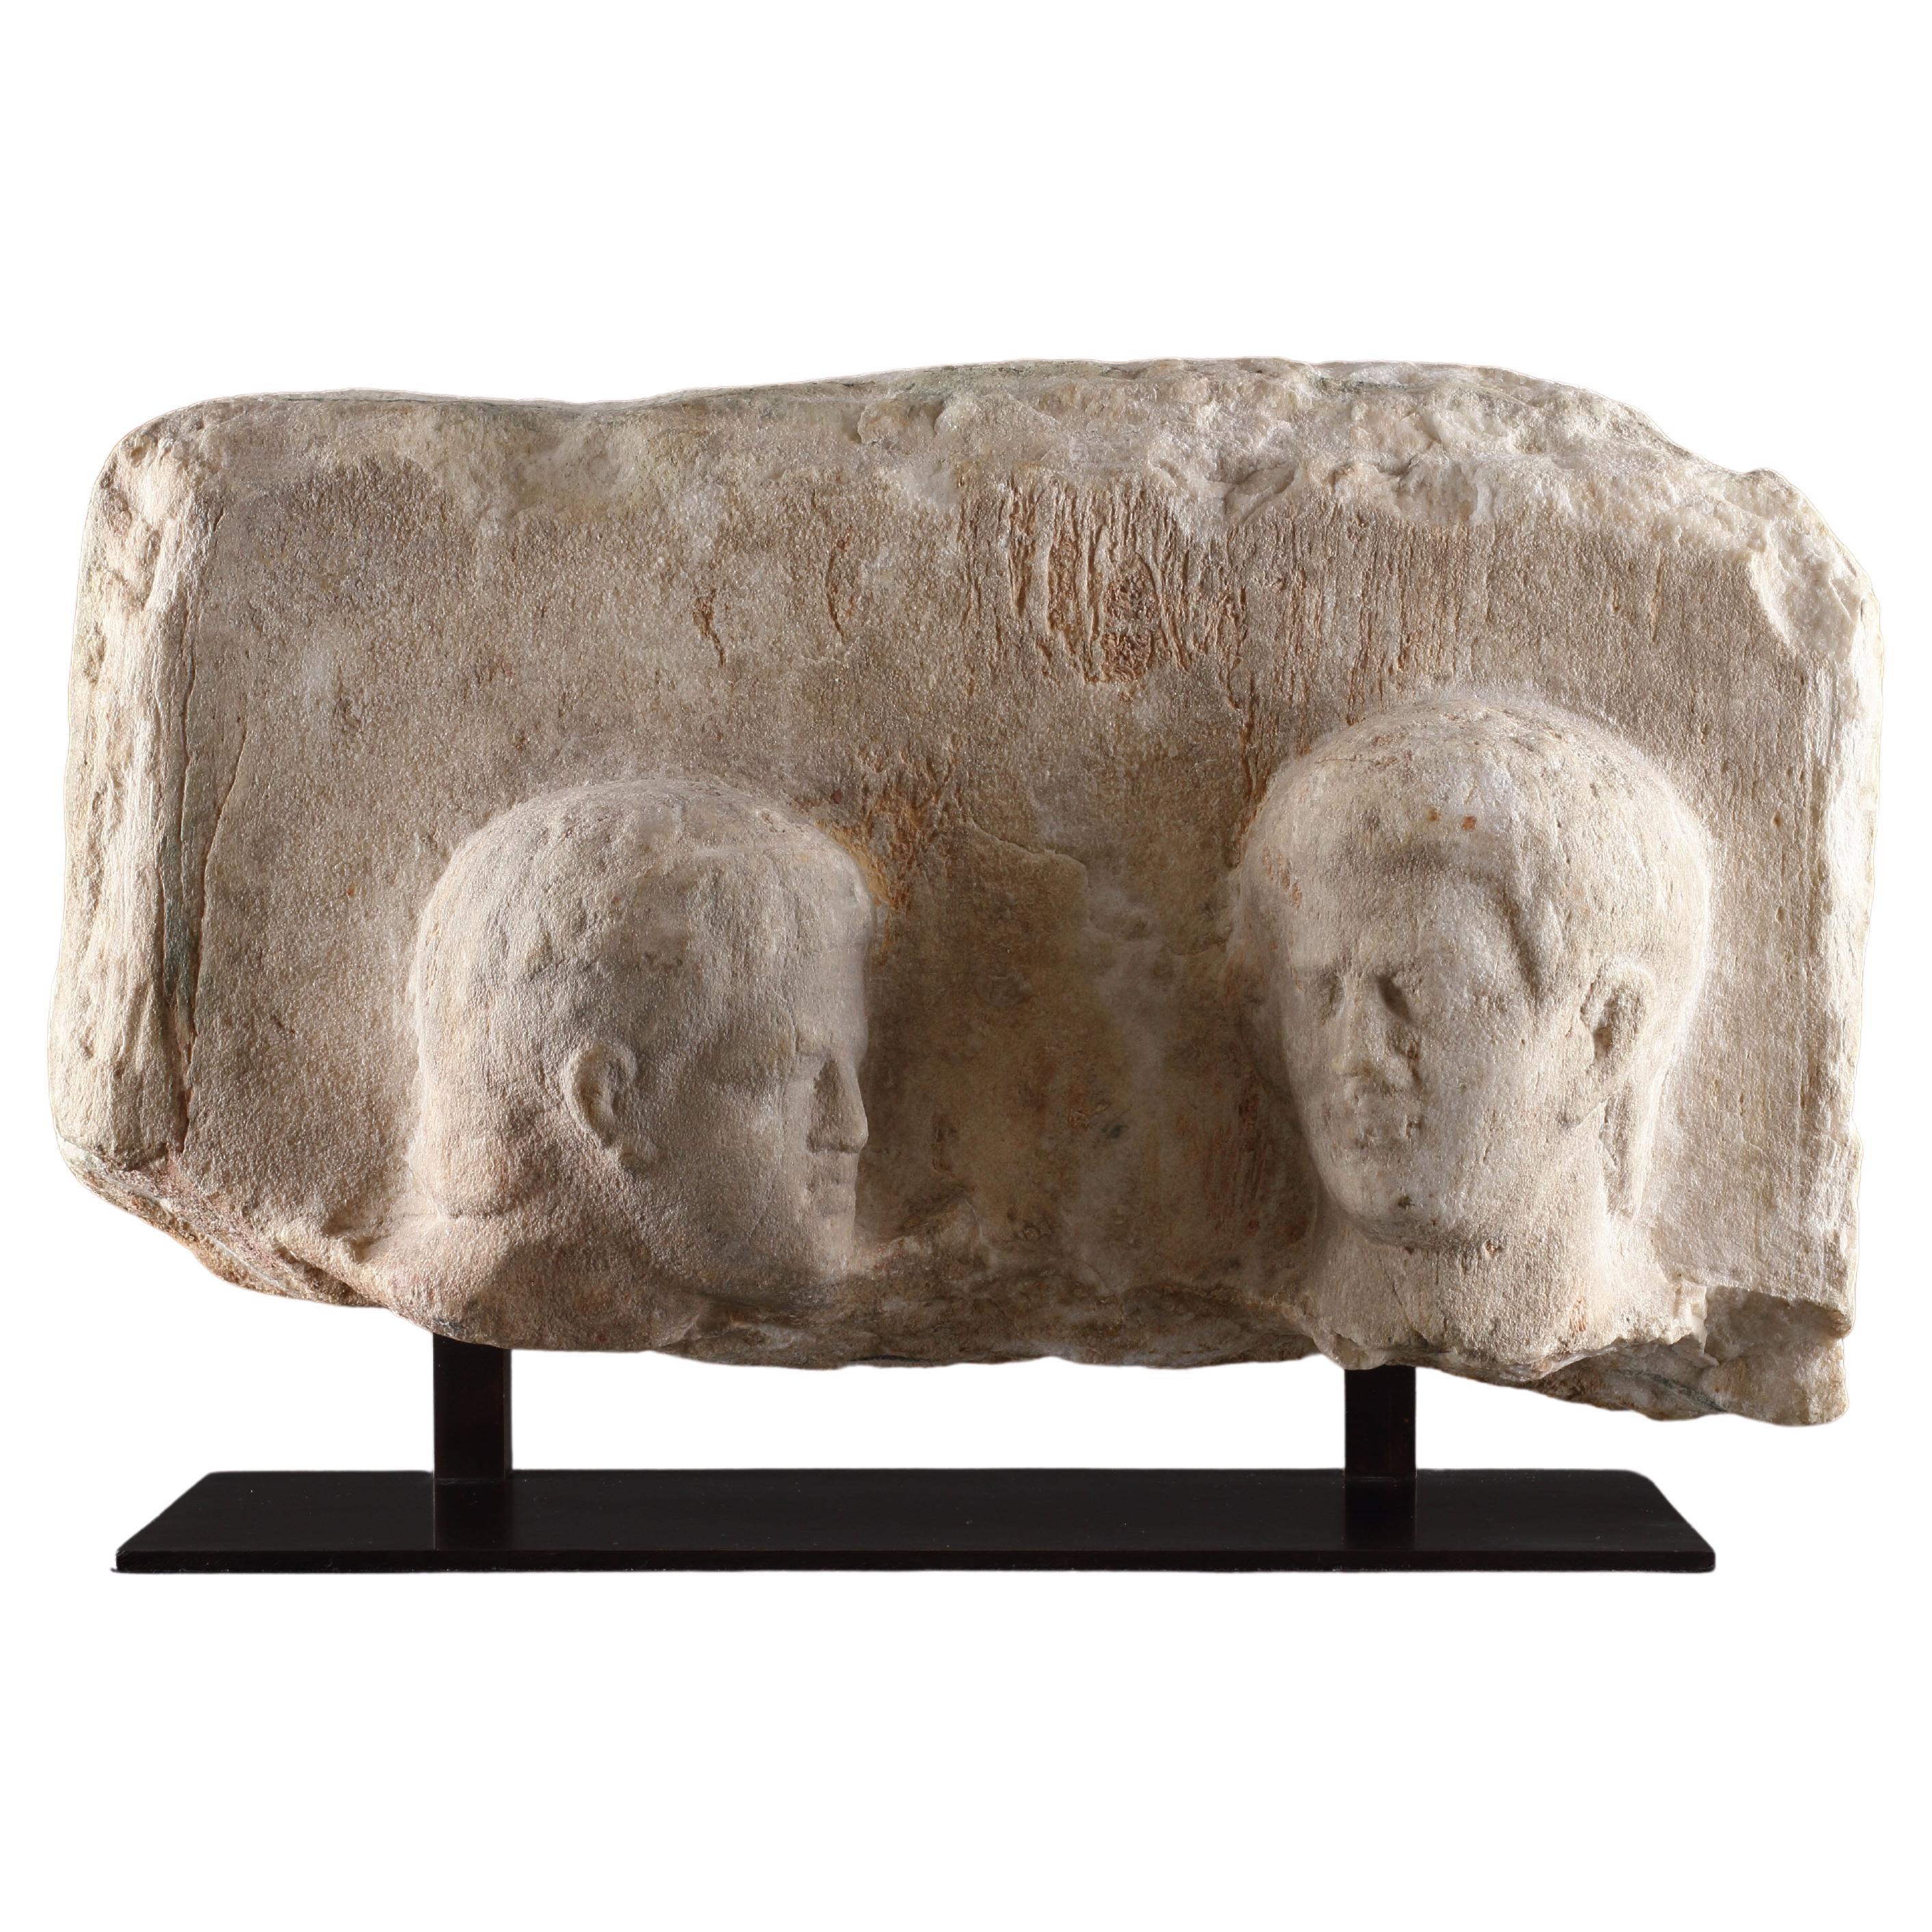 A Hellenistic Funerary Stele in High Relief with Two Male Heads For Sale